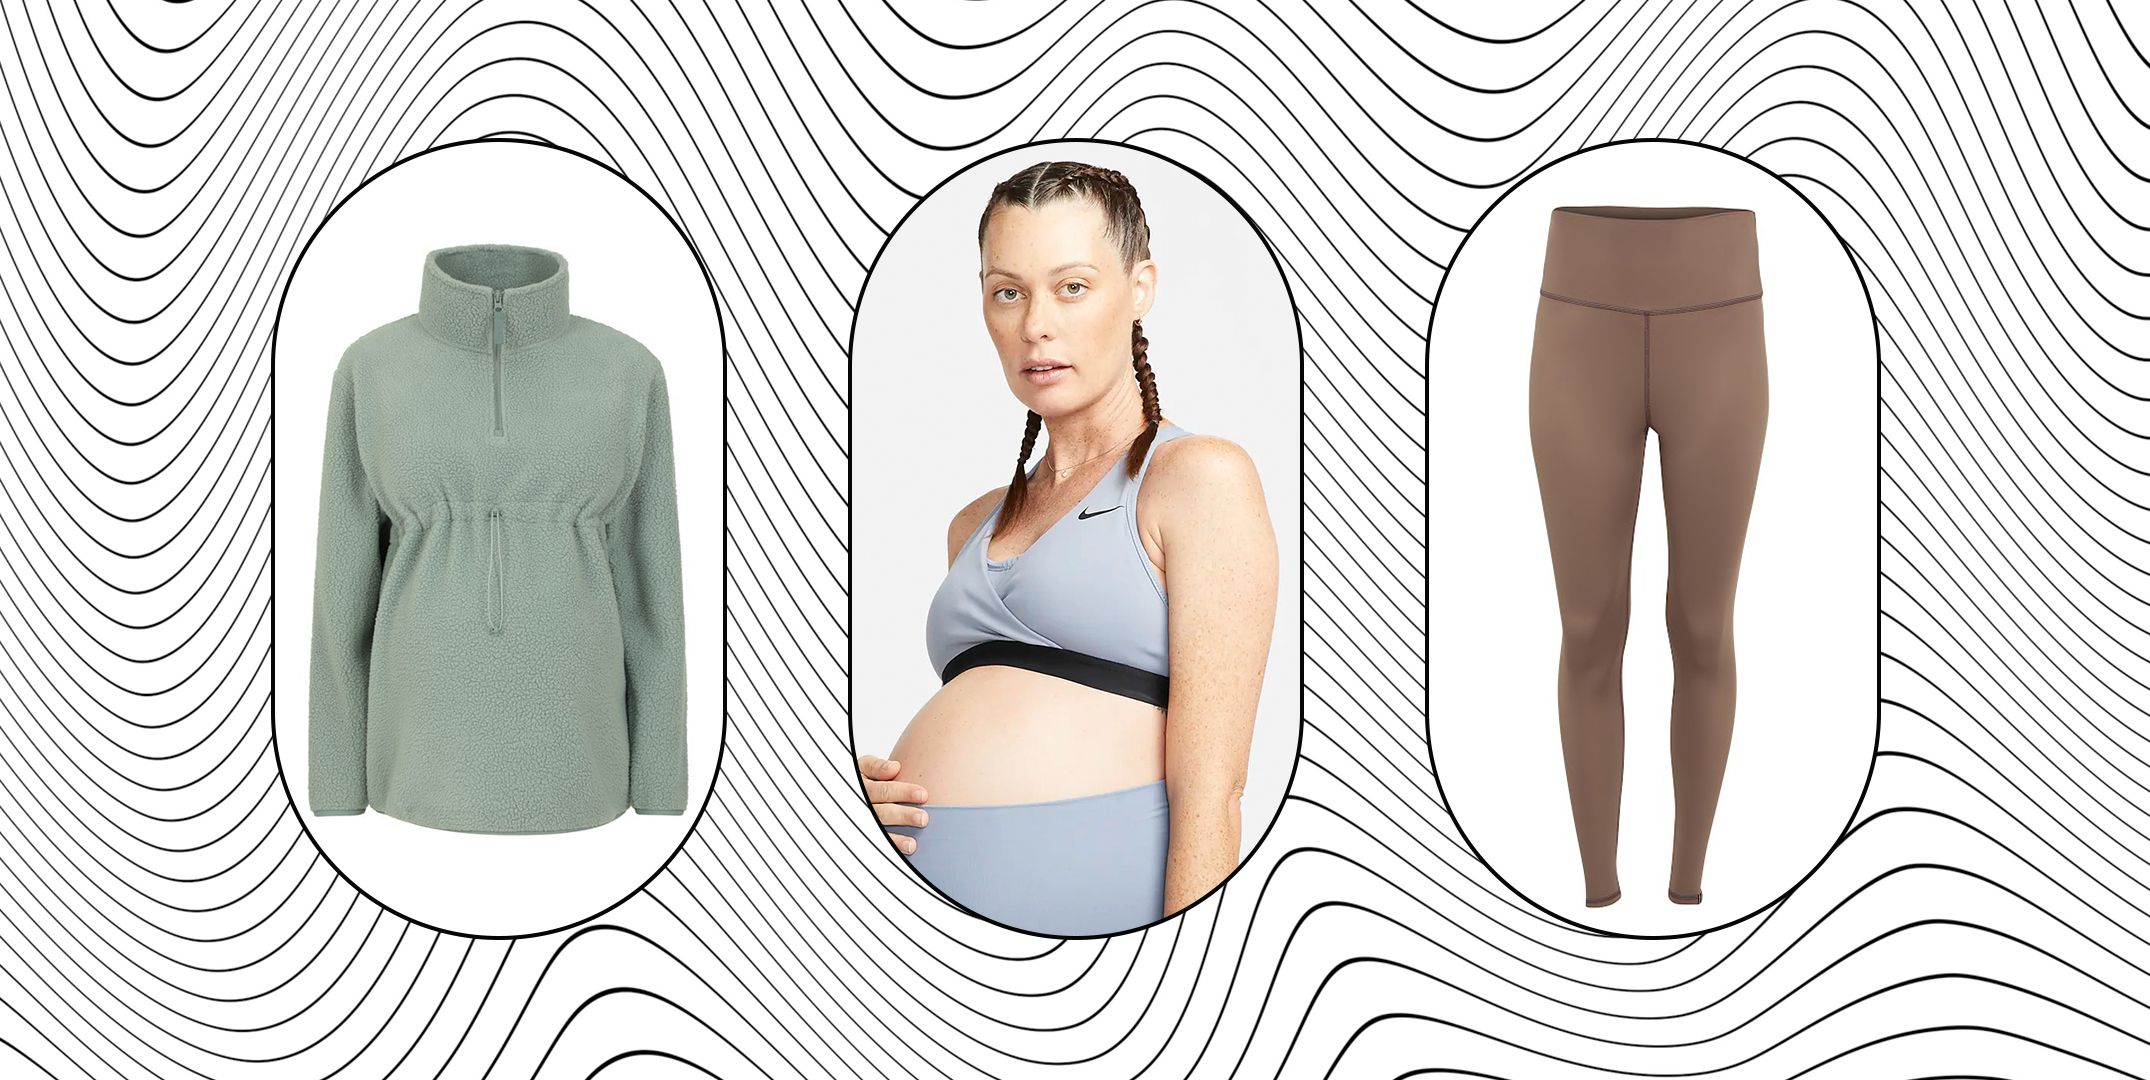 Best maternity sportswear brands: Clothes to keep active during pregnancy